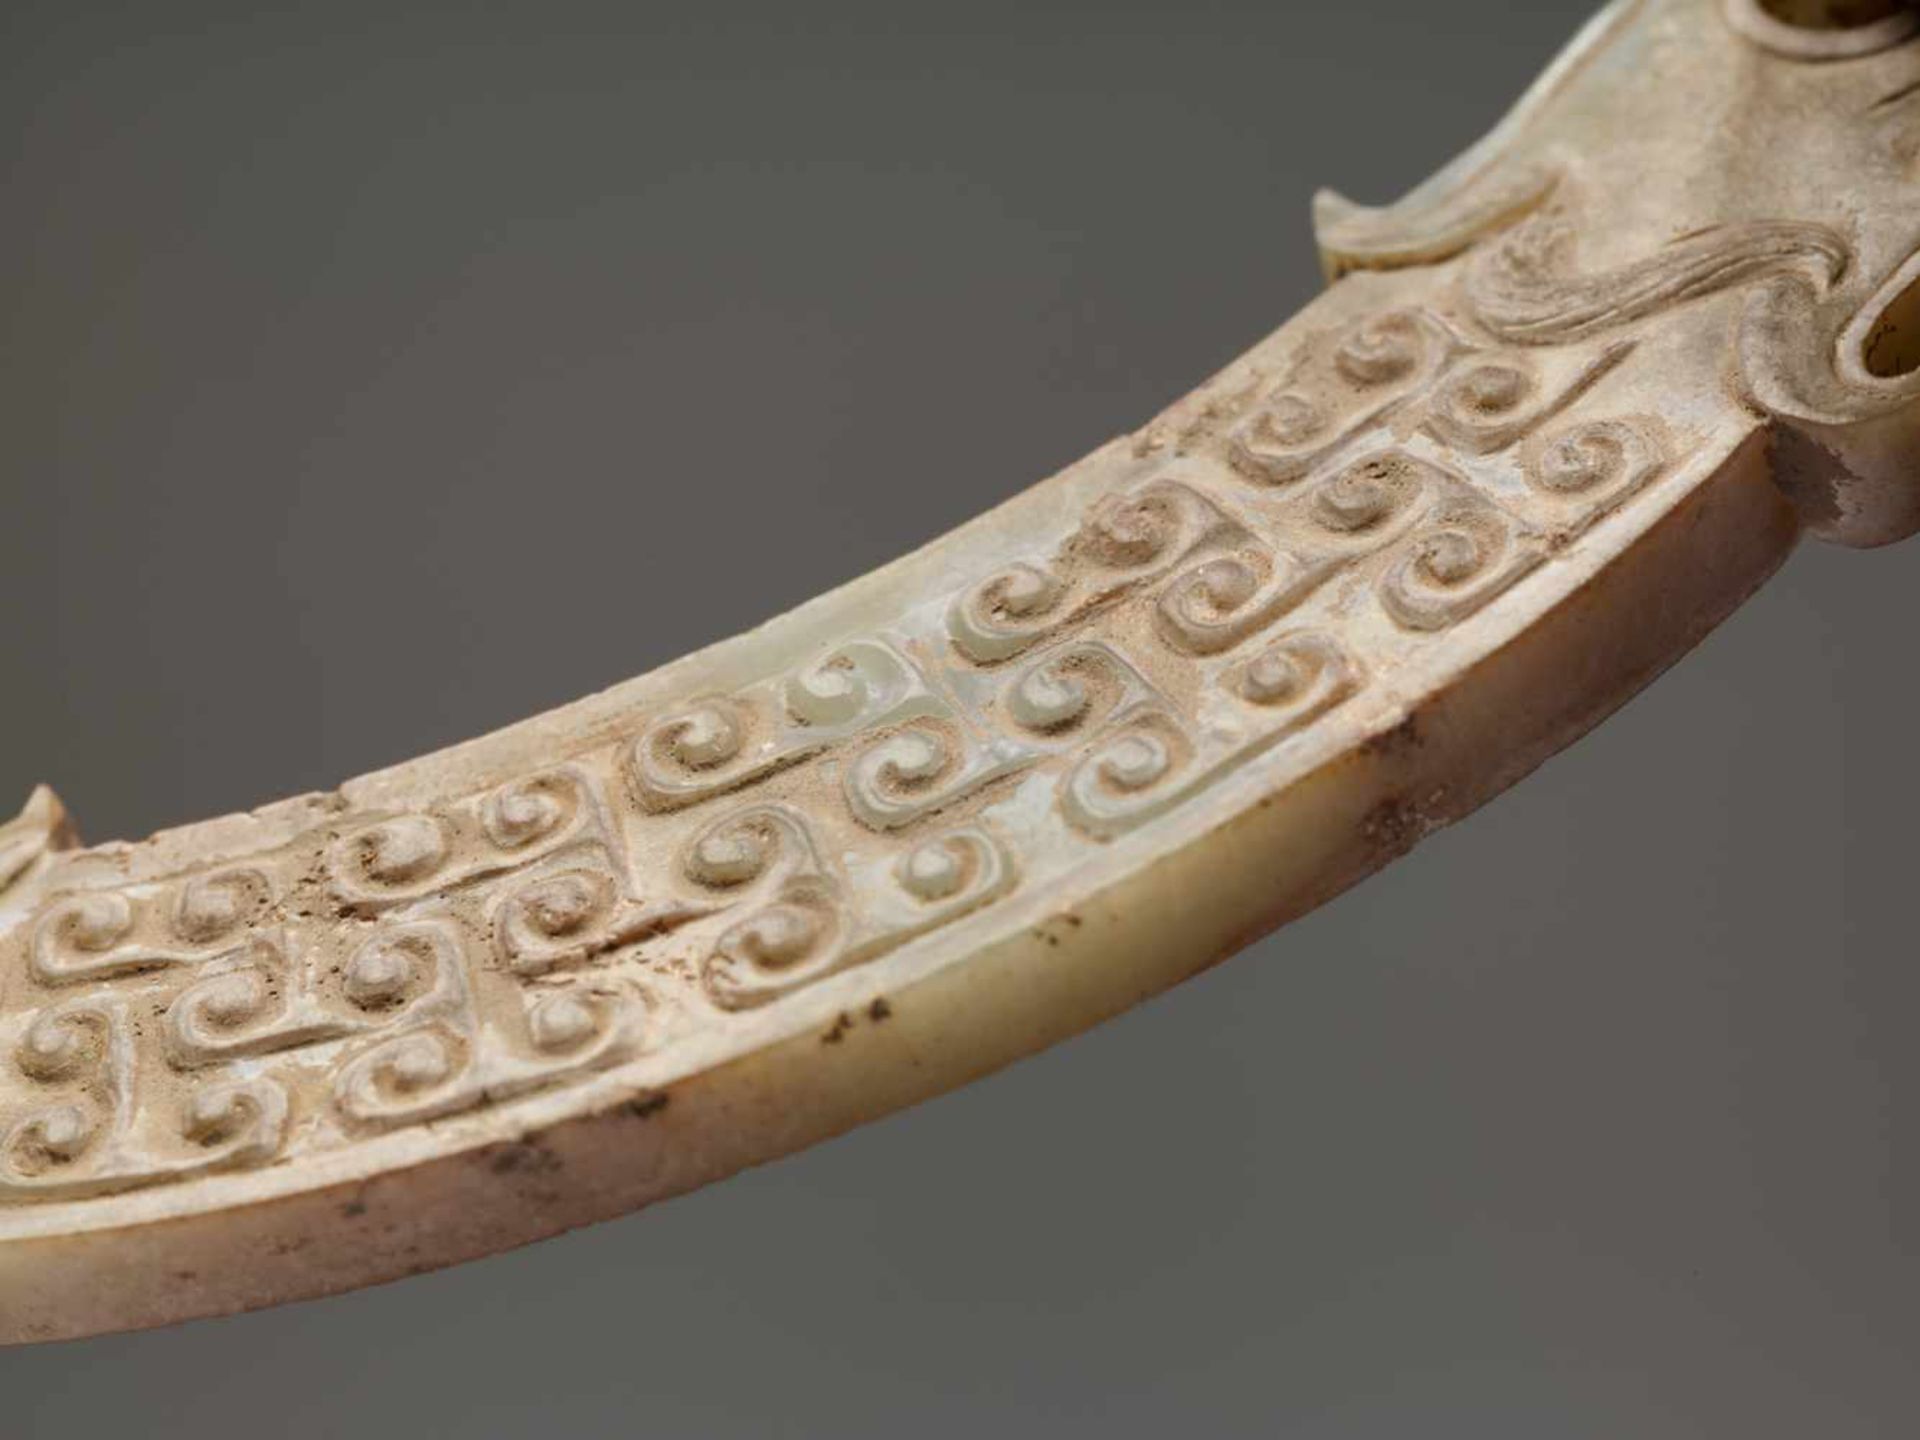 A UNIQUE HUANG ARCHED ORNAMENT DECORATED WITH DRAGONS IN OPENWORK ON THE SIDES Jade. China, - Image 6 of 11